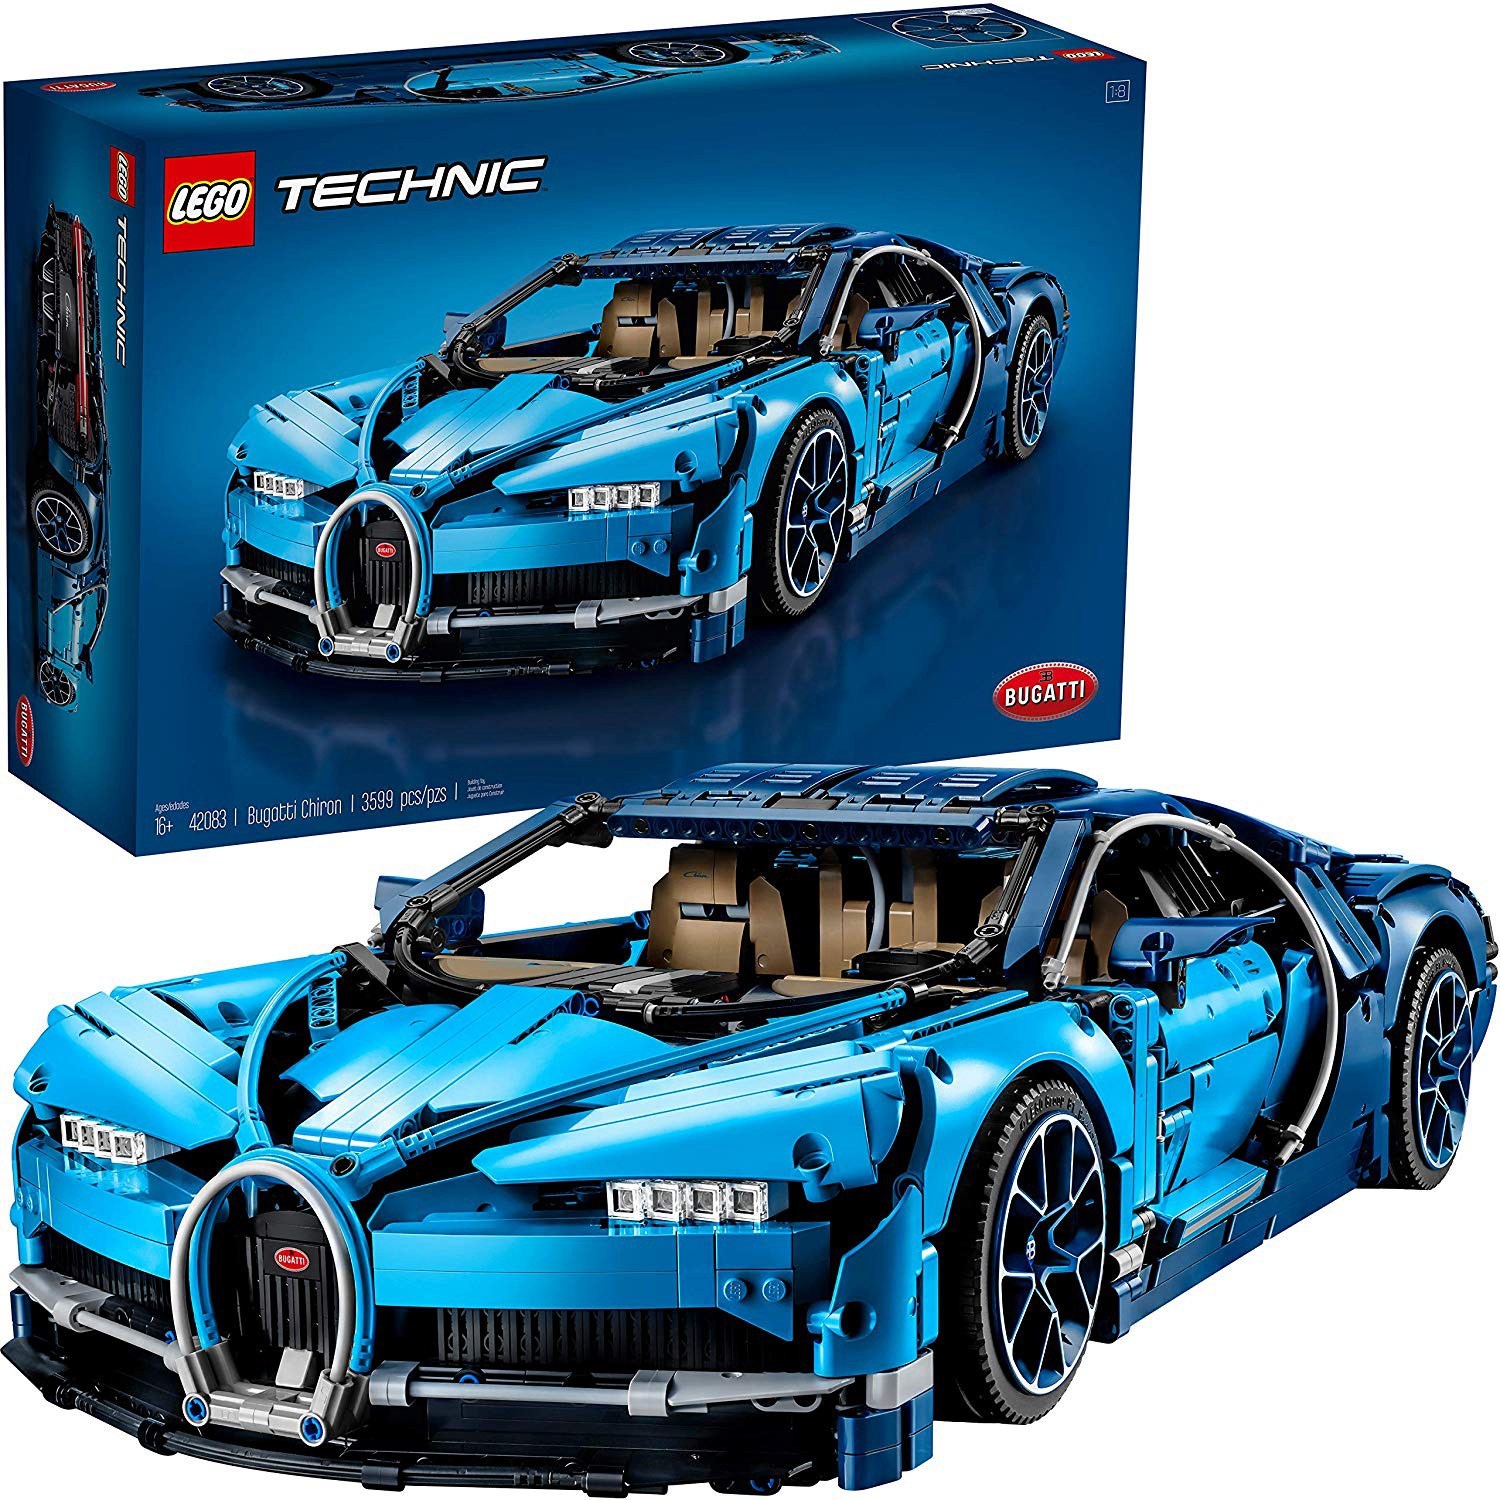 Standard LEGO Technic Bugatti Chiron 42083 Race Car Building Kit and Engineering Toy Adult Collect, 1 